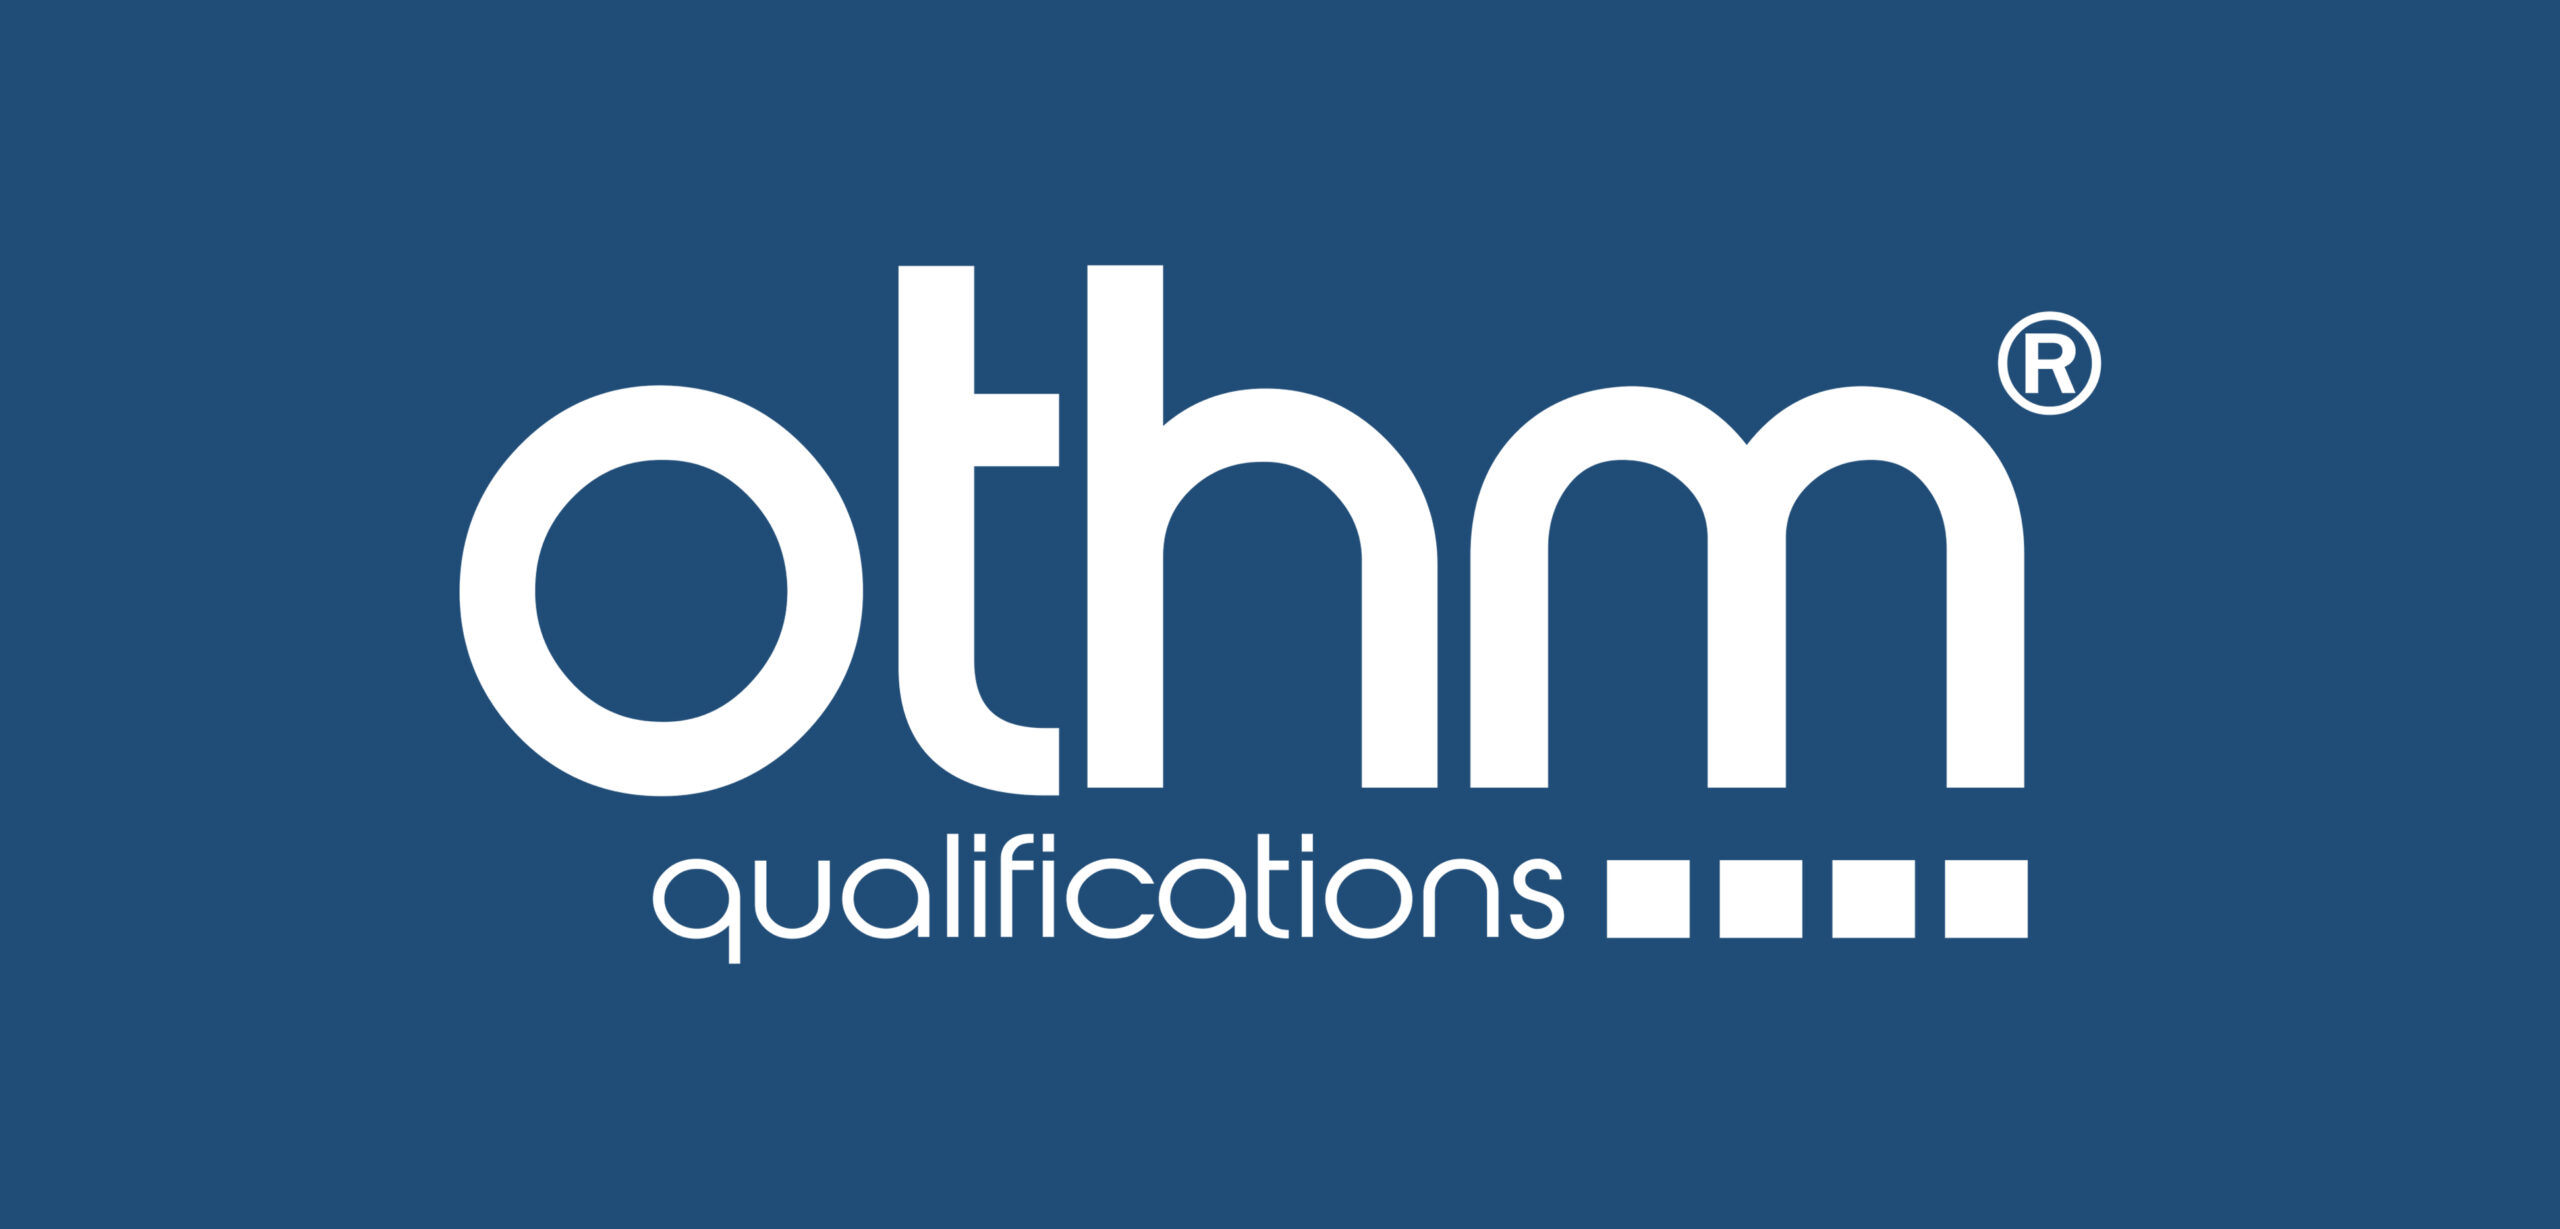 OTHM Level 7 Diploma in Police Leadership and Management